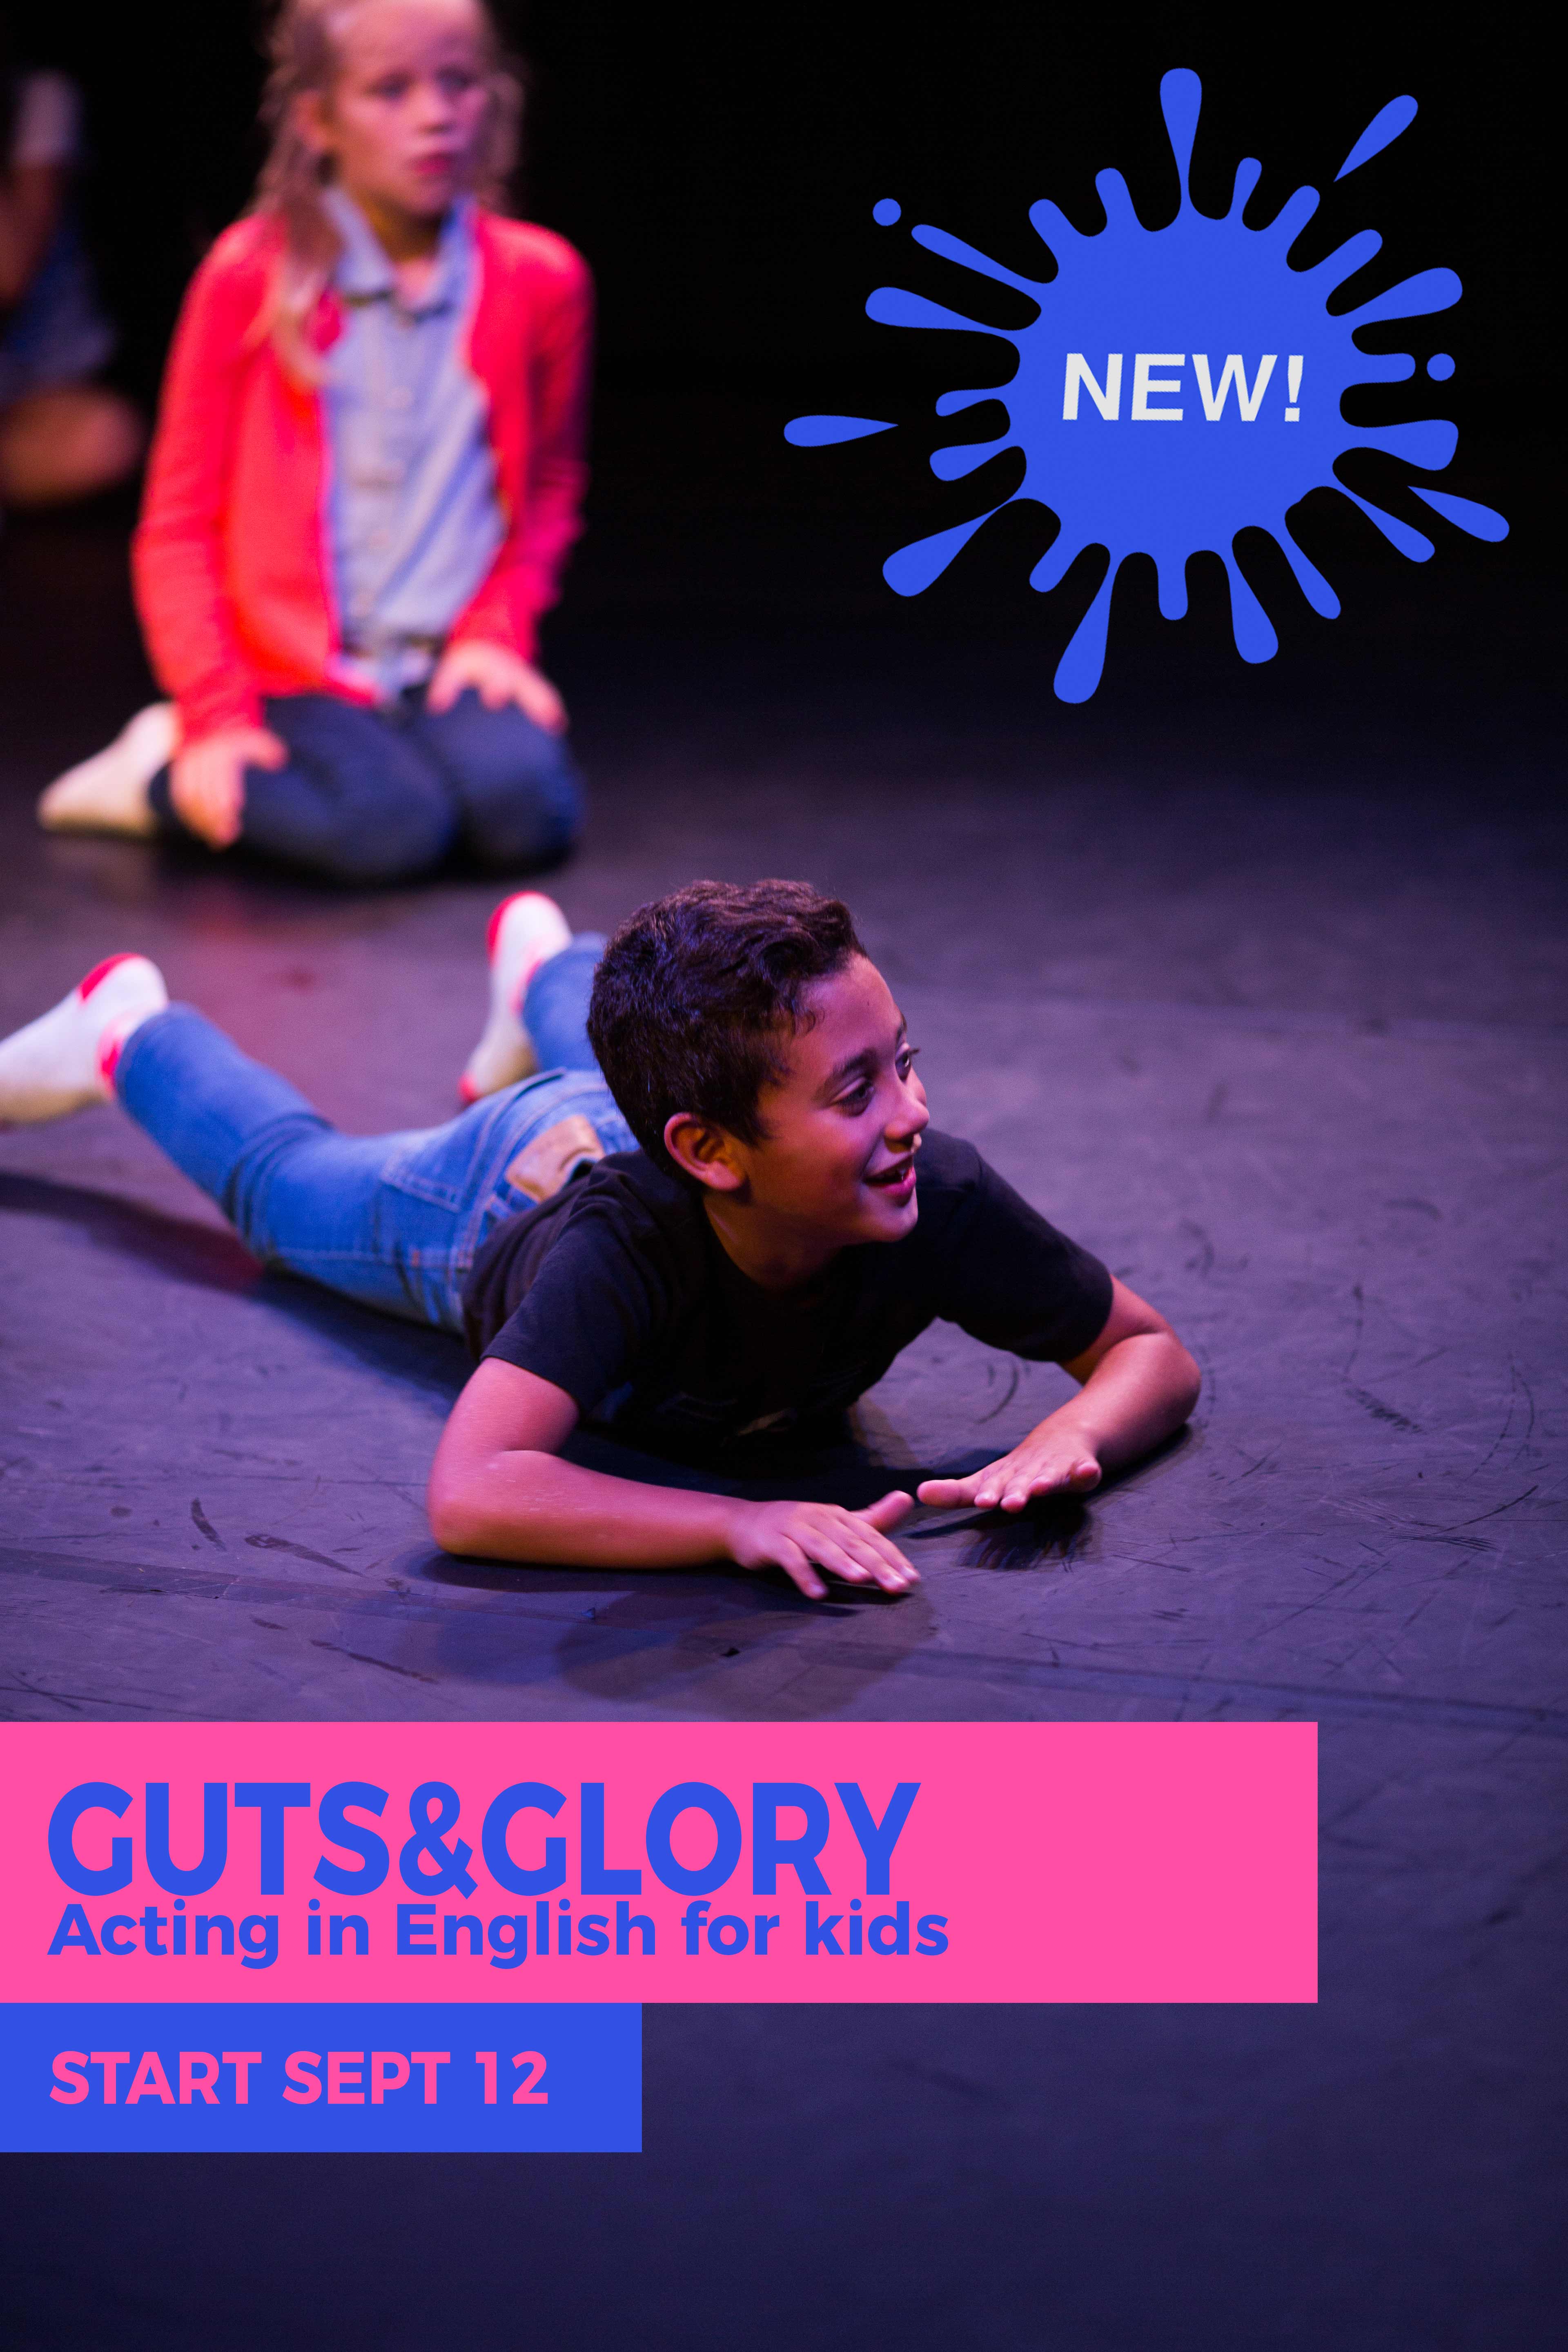 Start Guts & Glory     –     Acting in English for kids Sept 12